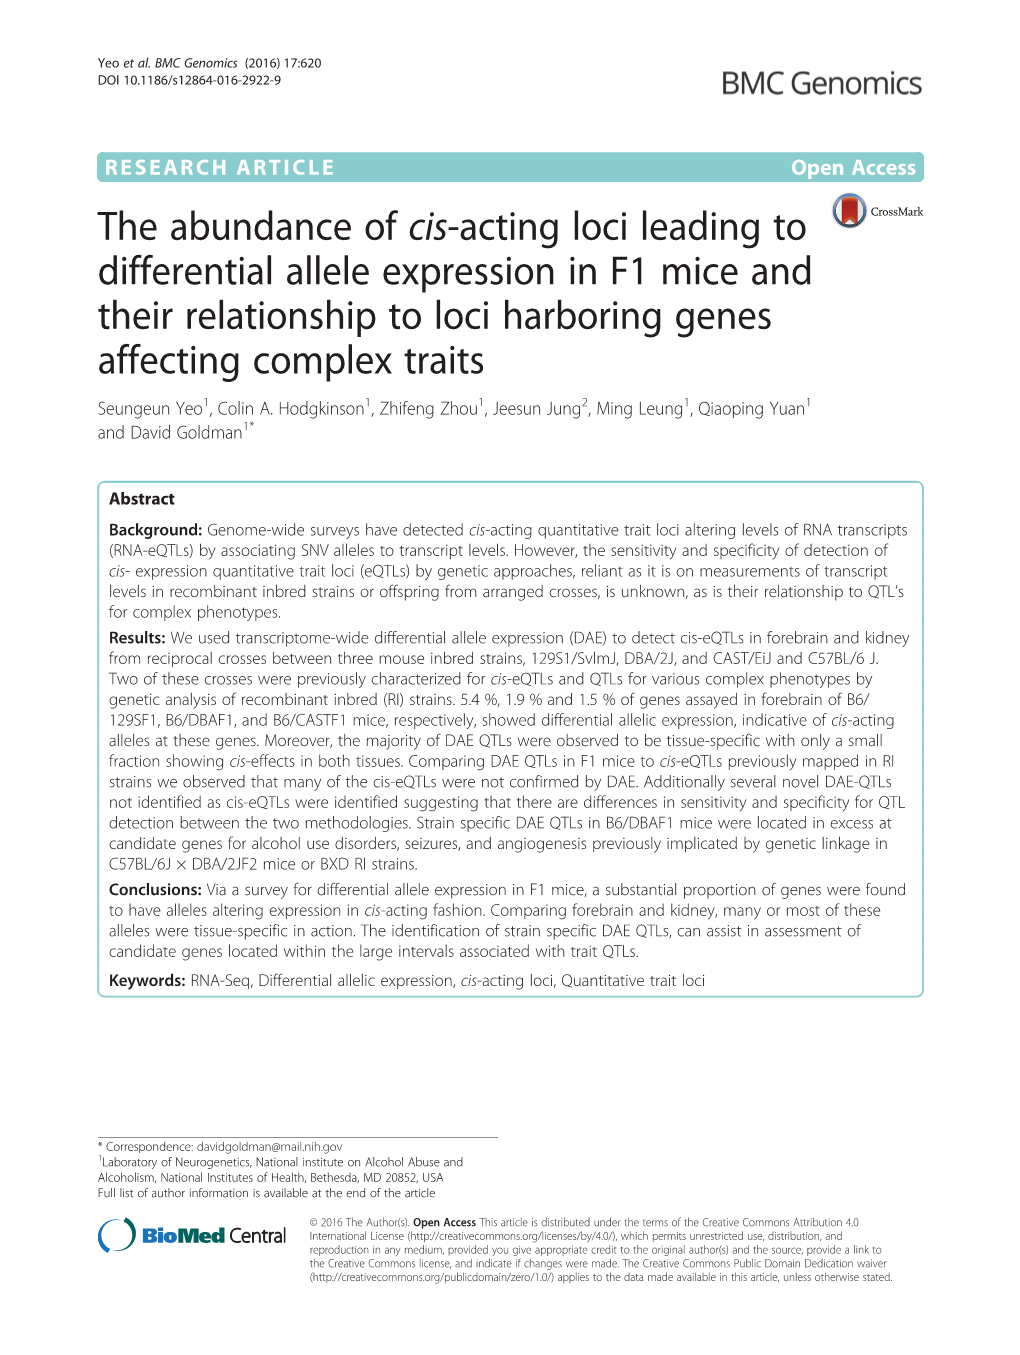 The Abundance of Cis-Acting Loci Leading to Differential Allele